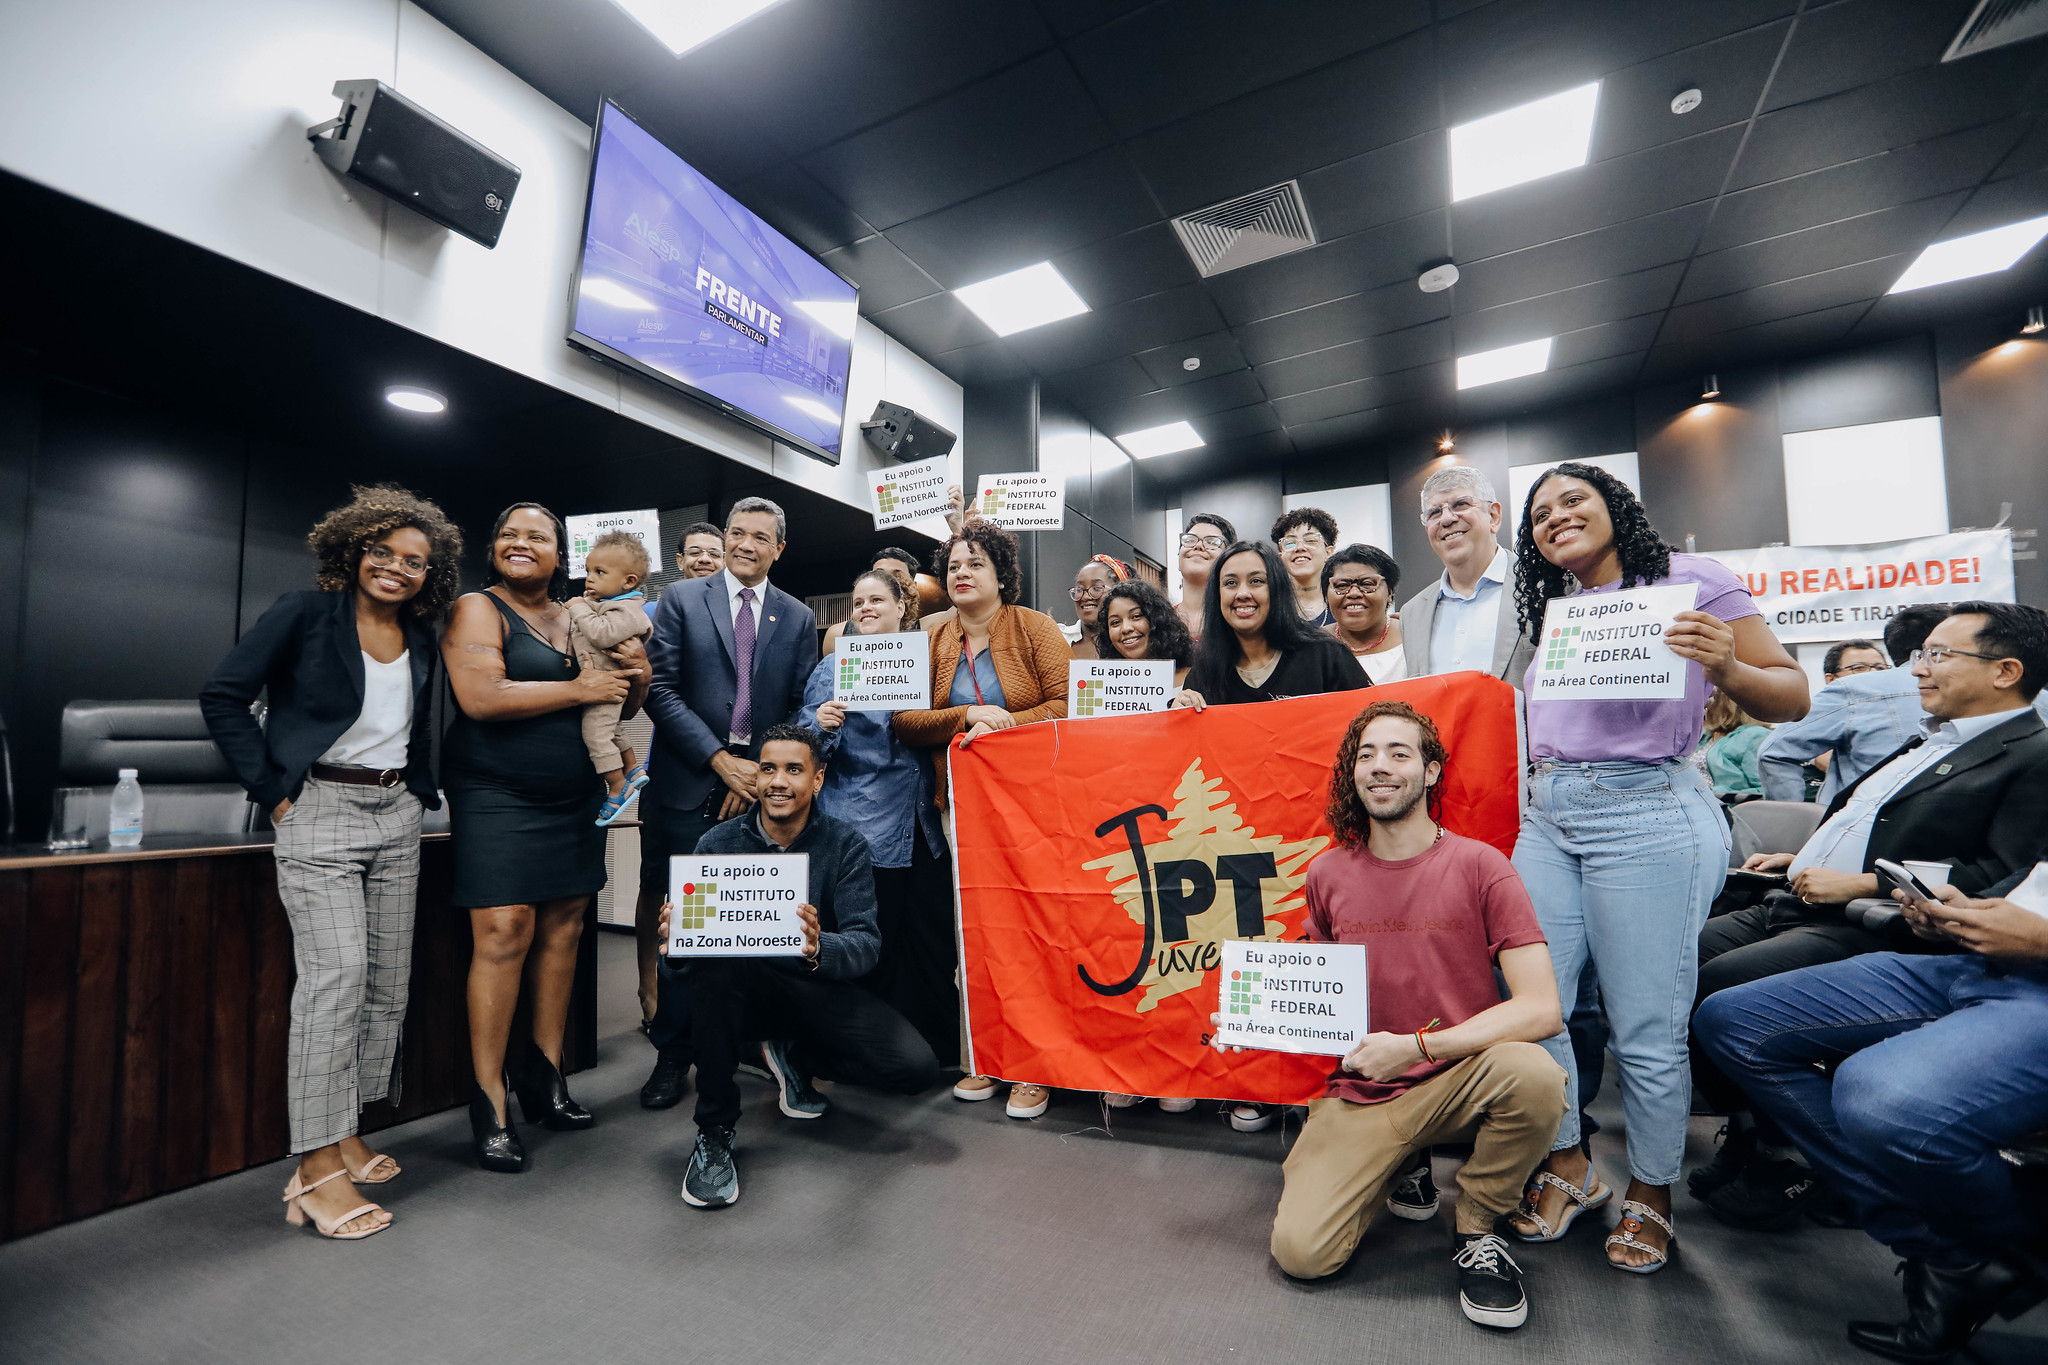 Frente Parlamentar pr-Instituto Federal<a style='float:right' href='https://www3.al.sp.gov.br/repositorio/noticia/N-03-2024/fg321496.jpg' target=_blank><img src='/_img/material-file-download-white.png' width='14px' alt='Clique para baixar a imagem'></a>